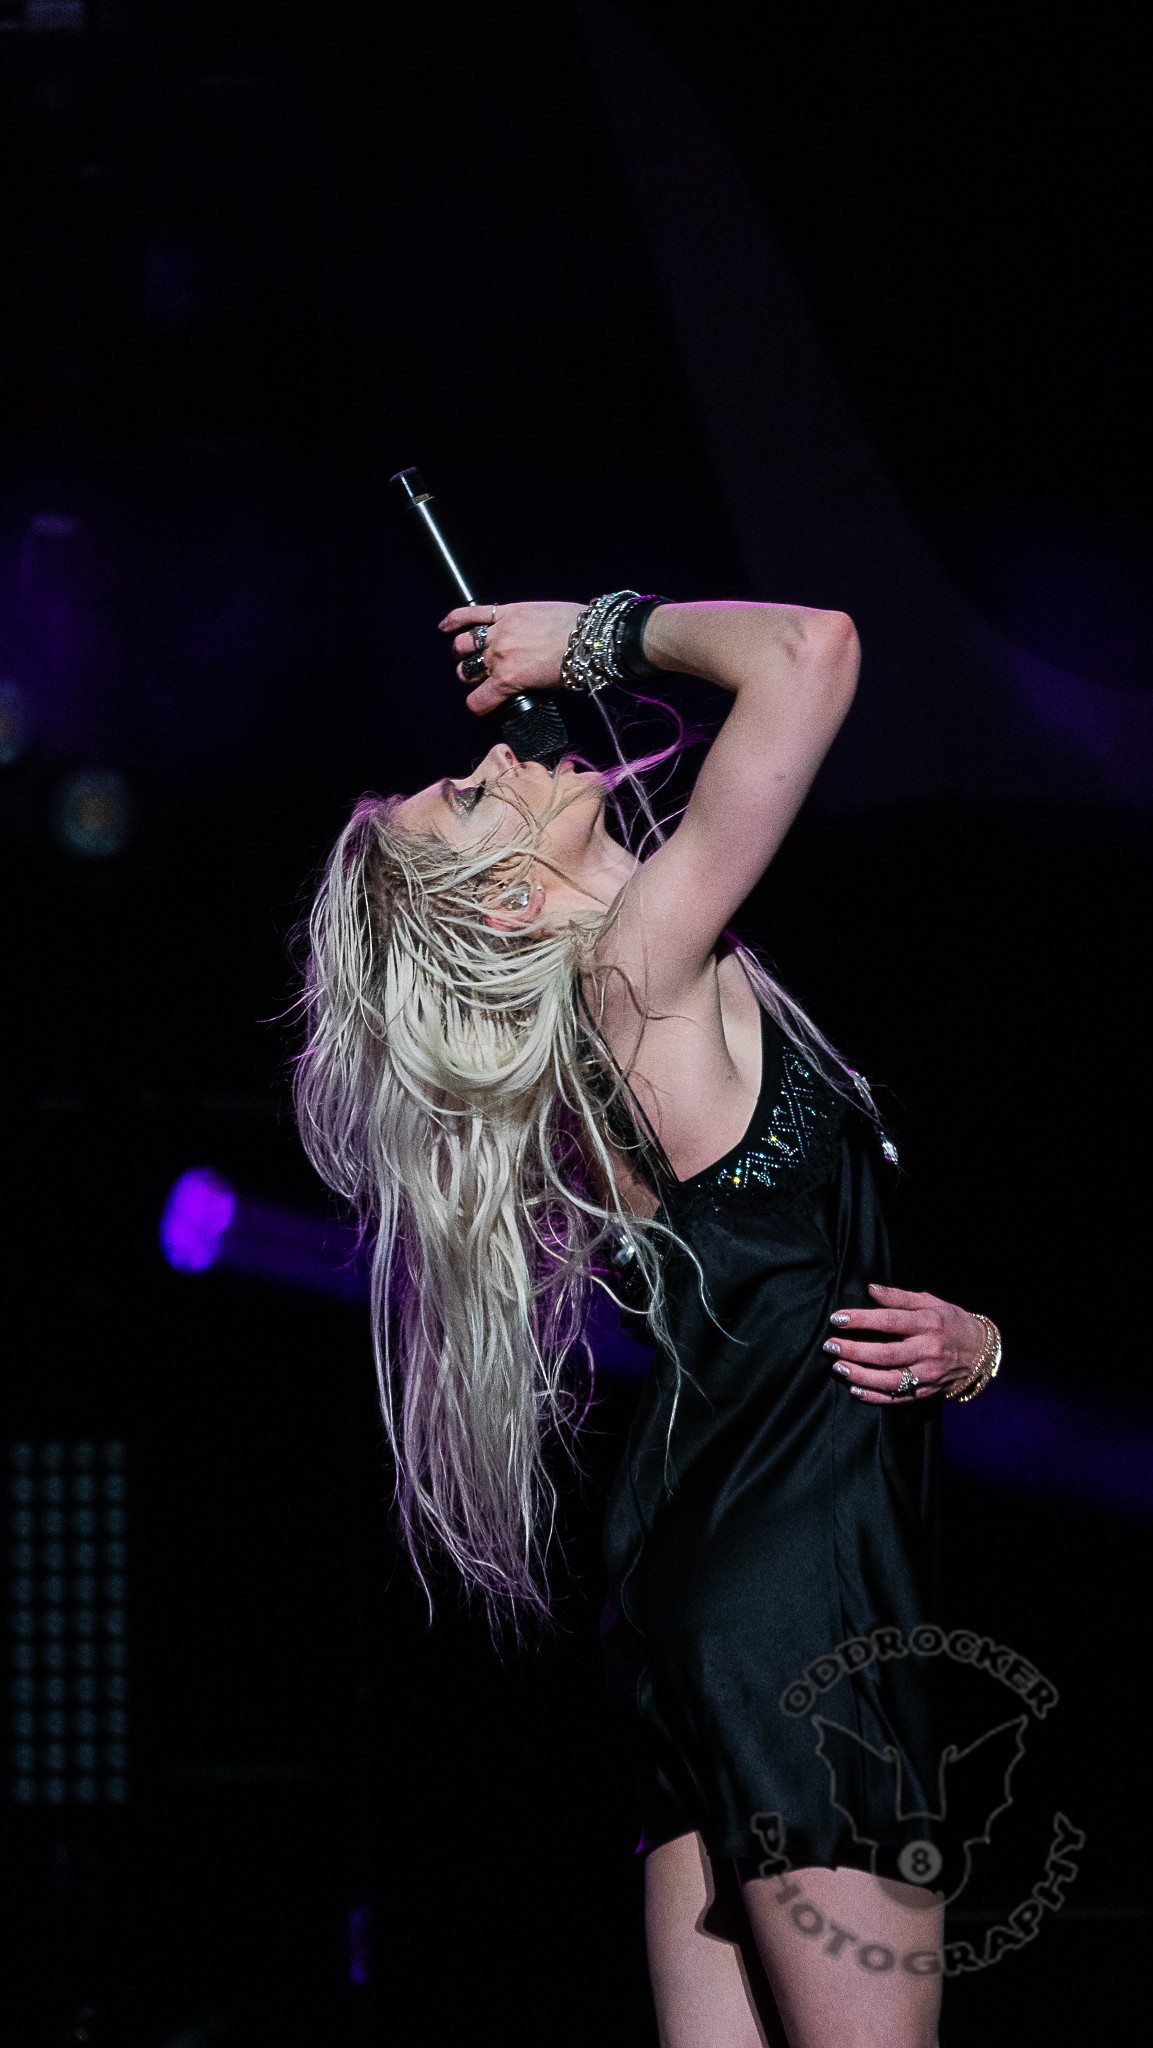 The Pretty Reckless -Taylor